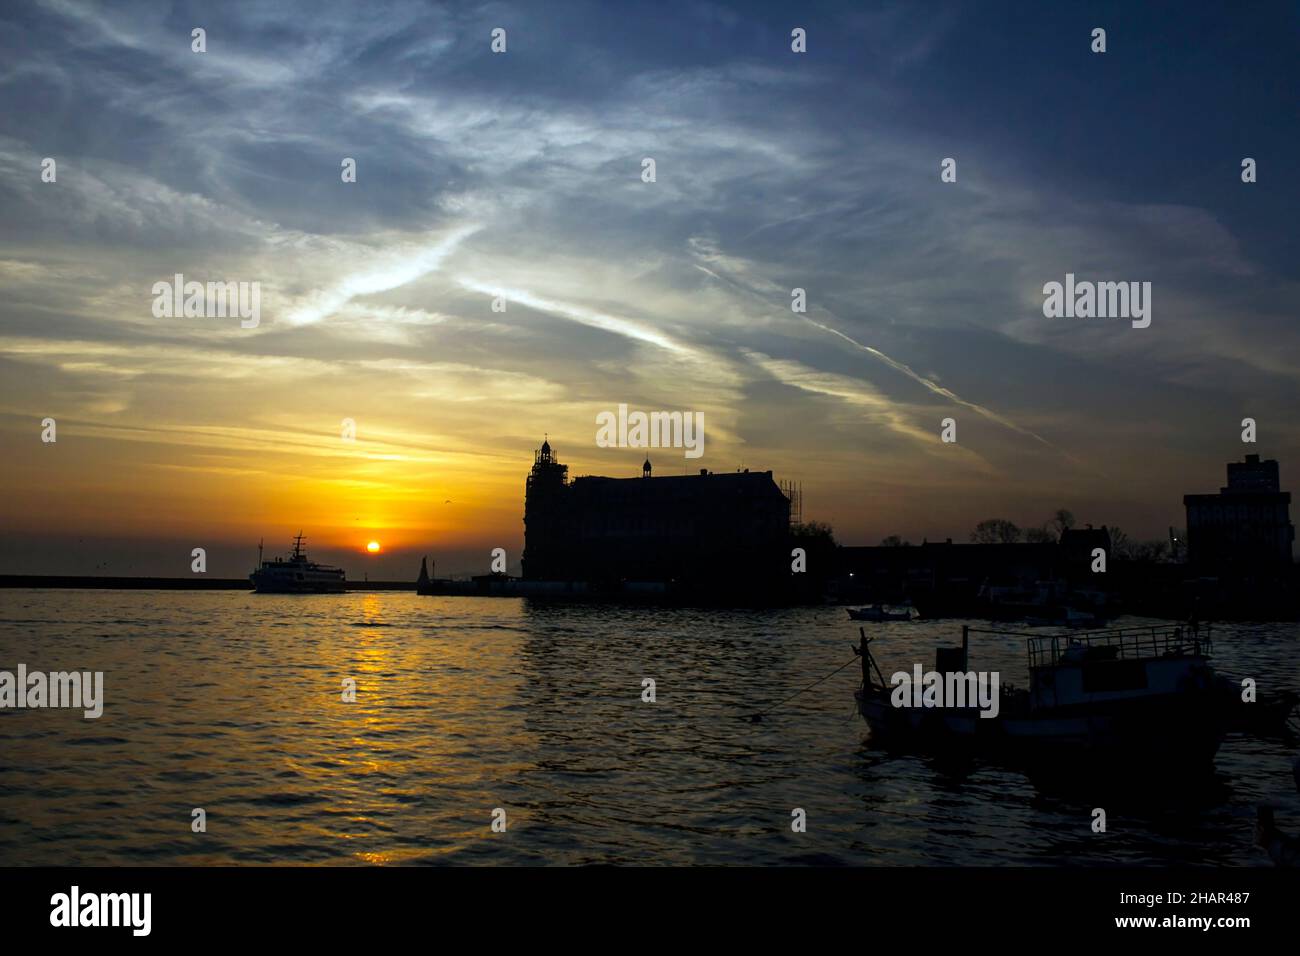 Haydarpasa Terminal Building in the Istanbul of Turkey in silhouette when sunset time. Stock Photo